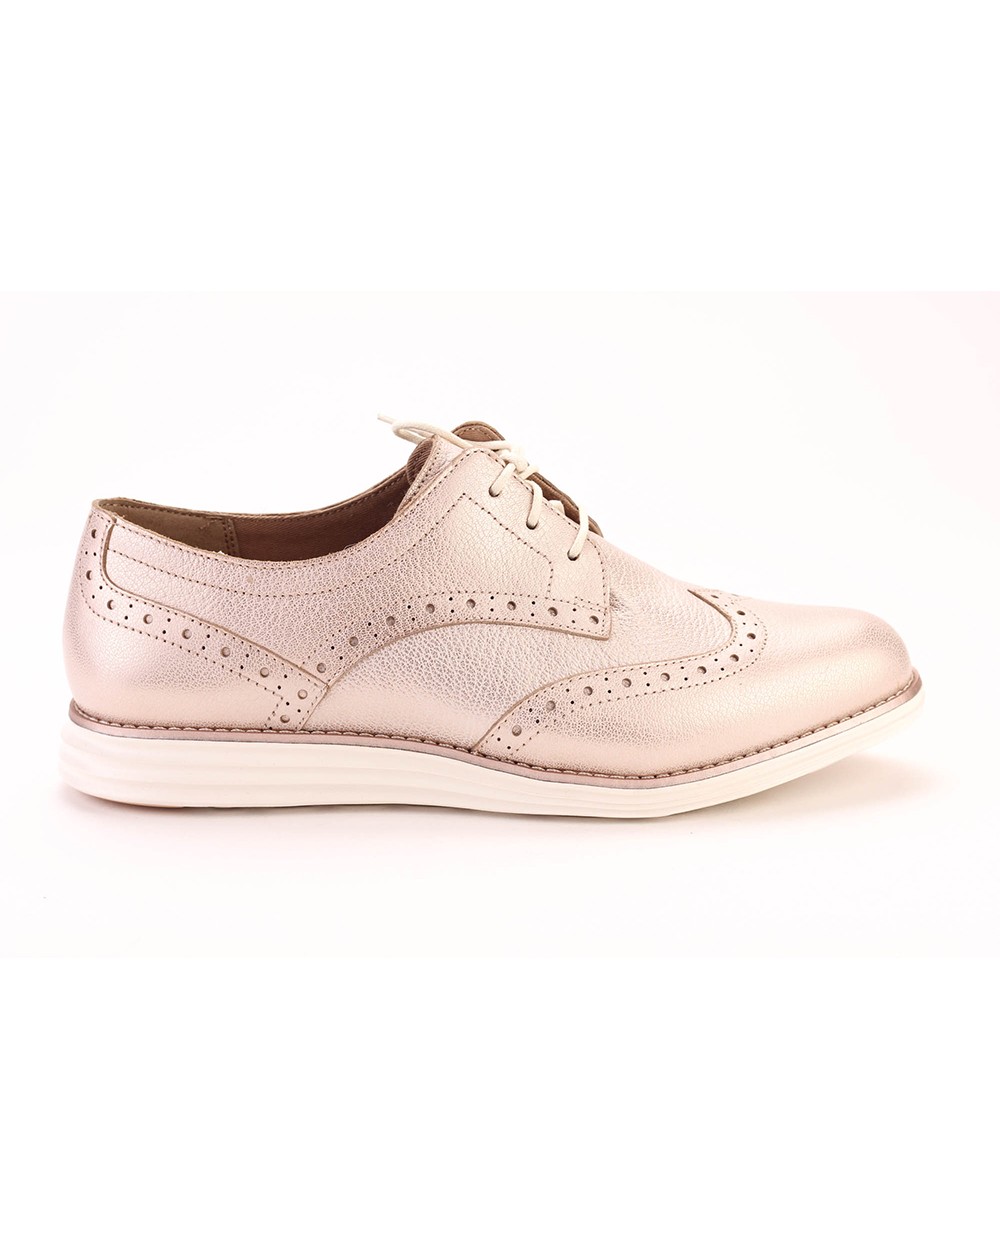 COLE HAAN W02997 Zapatos